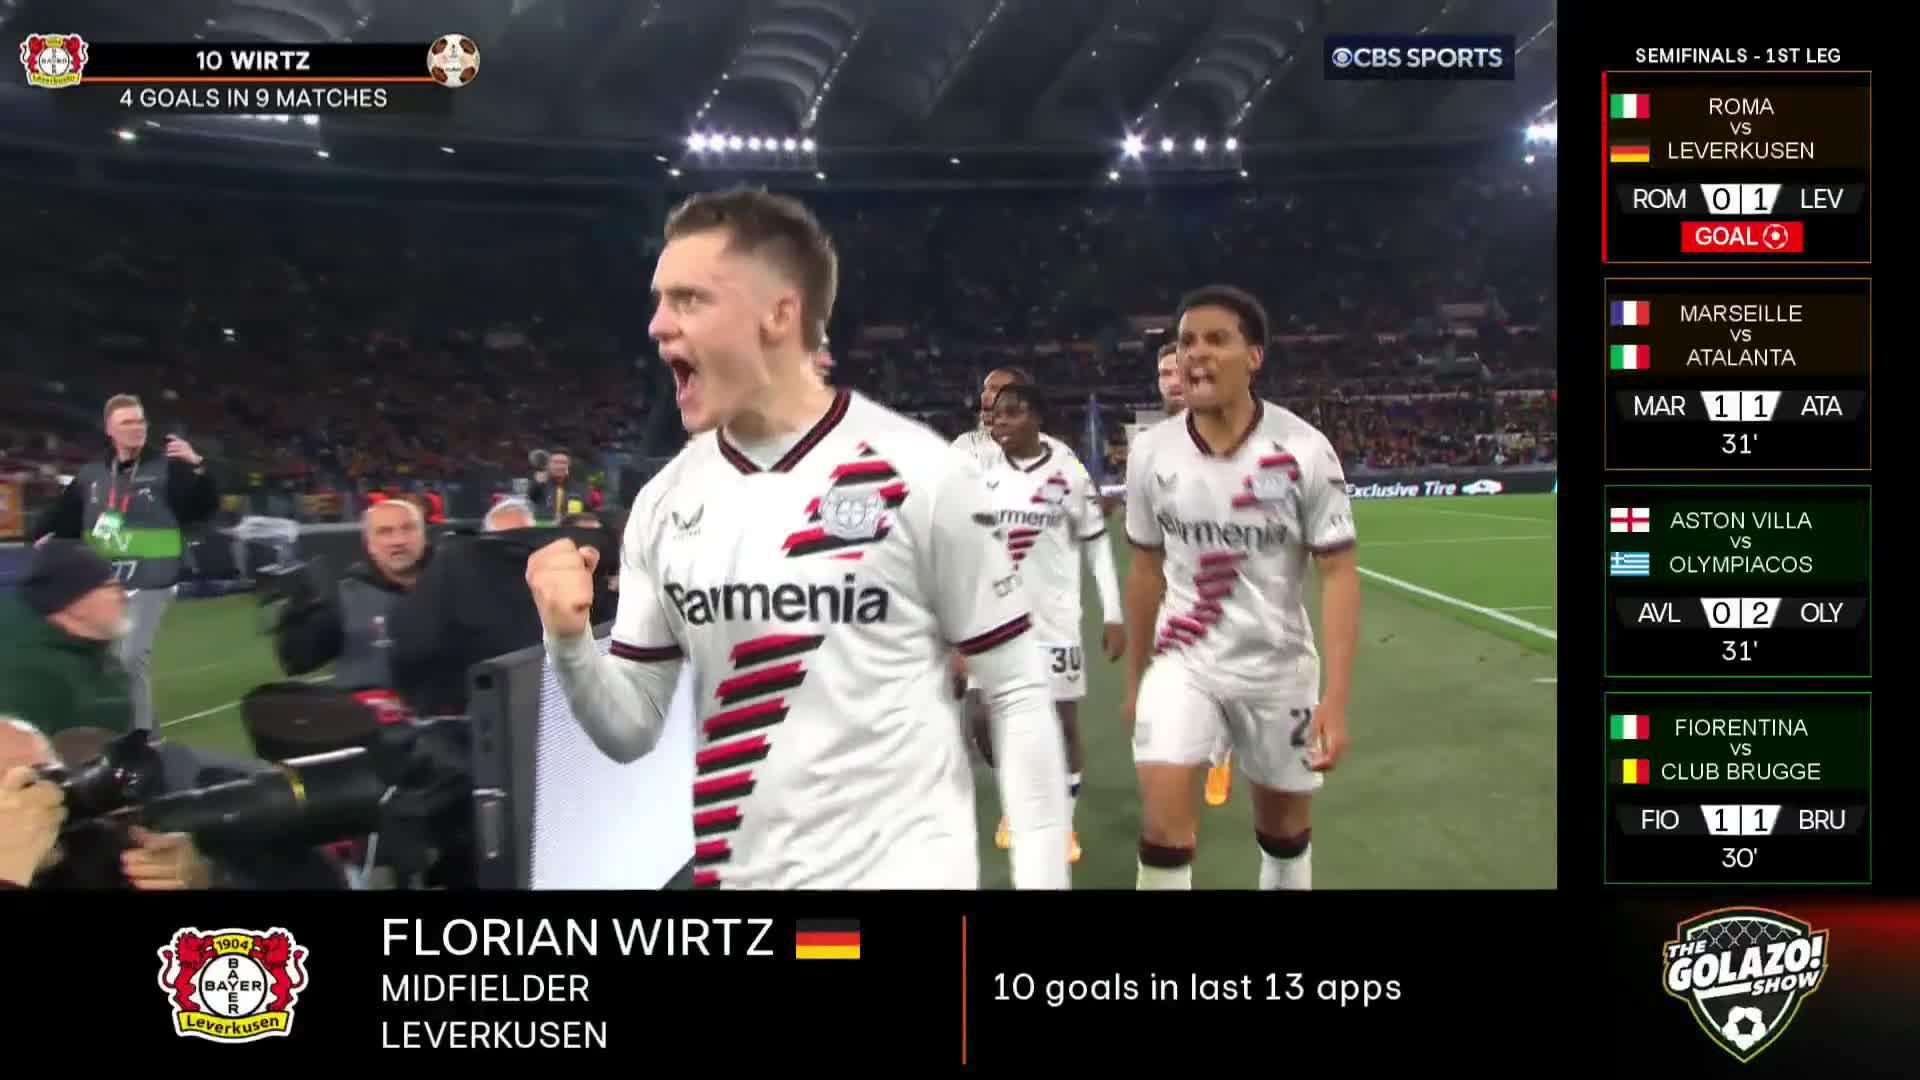 Calamity at the back for Roma 🙈Florian Wirtz takes advantage of a gift for Leverkusen 🎁